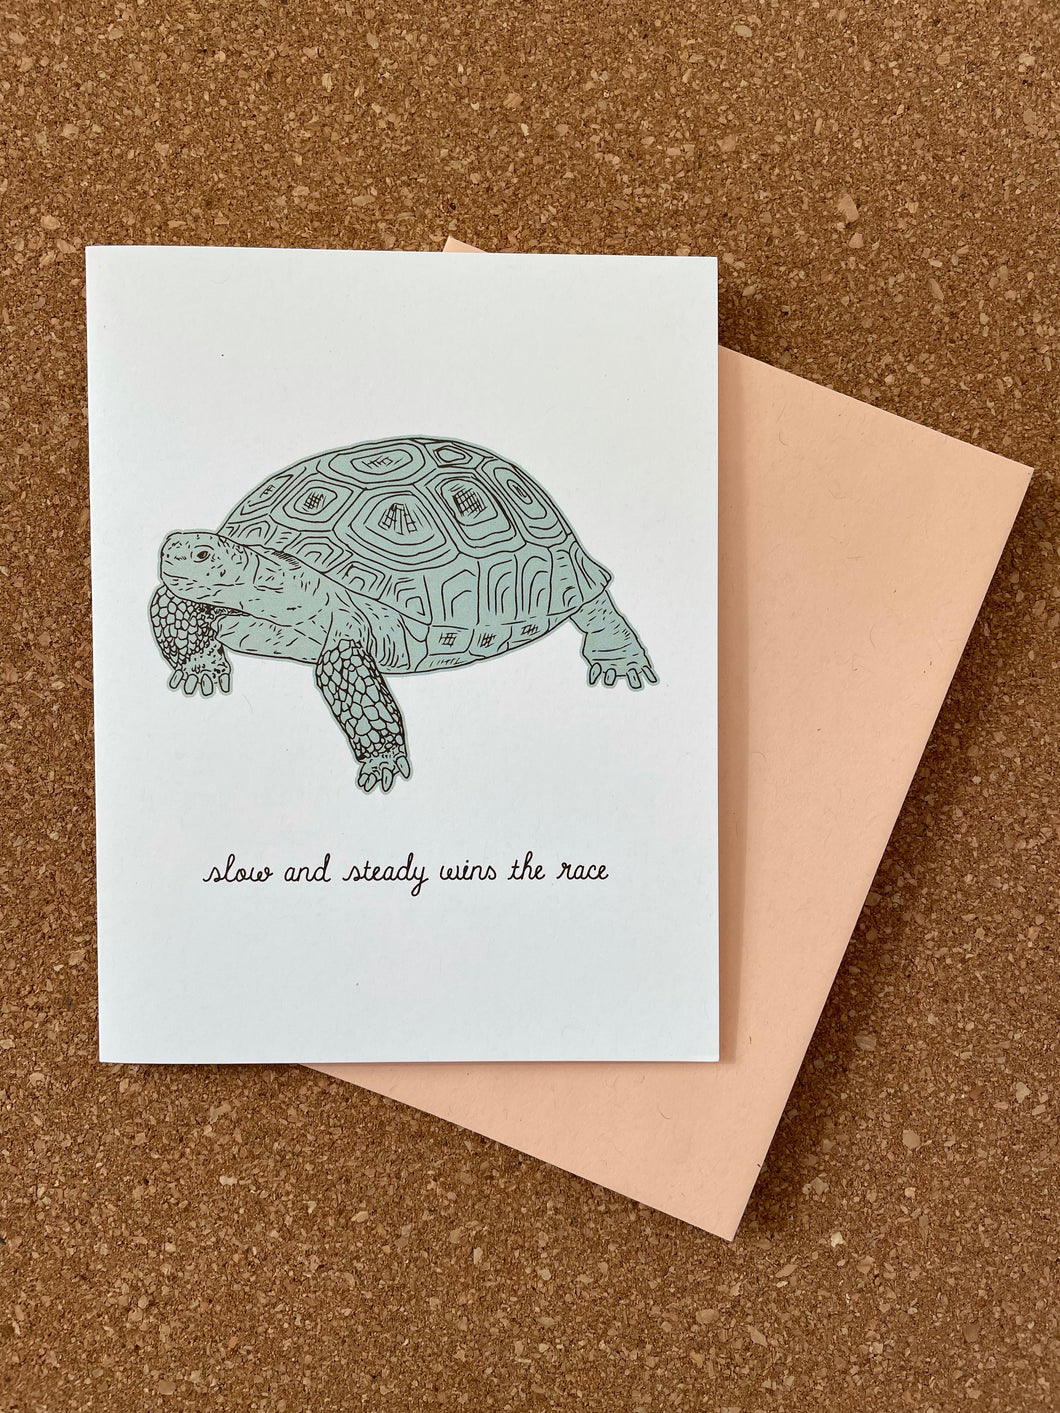 Desert Tortoise Greeting Card - slow and steady wins the race